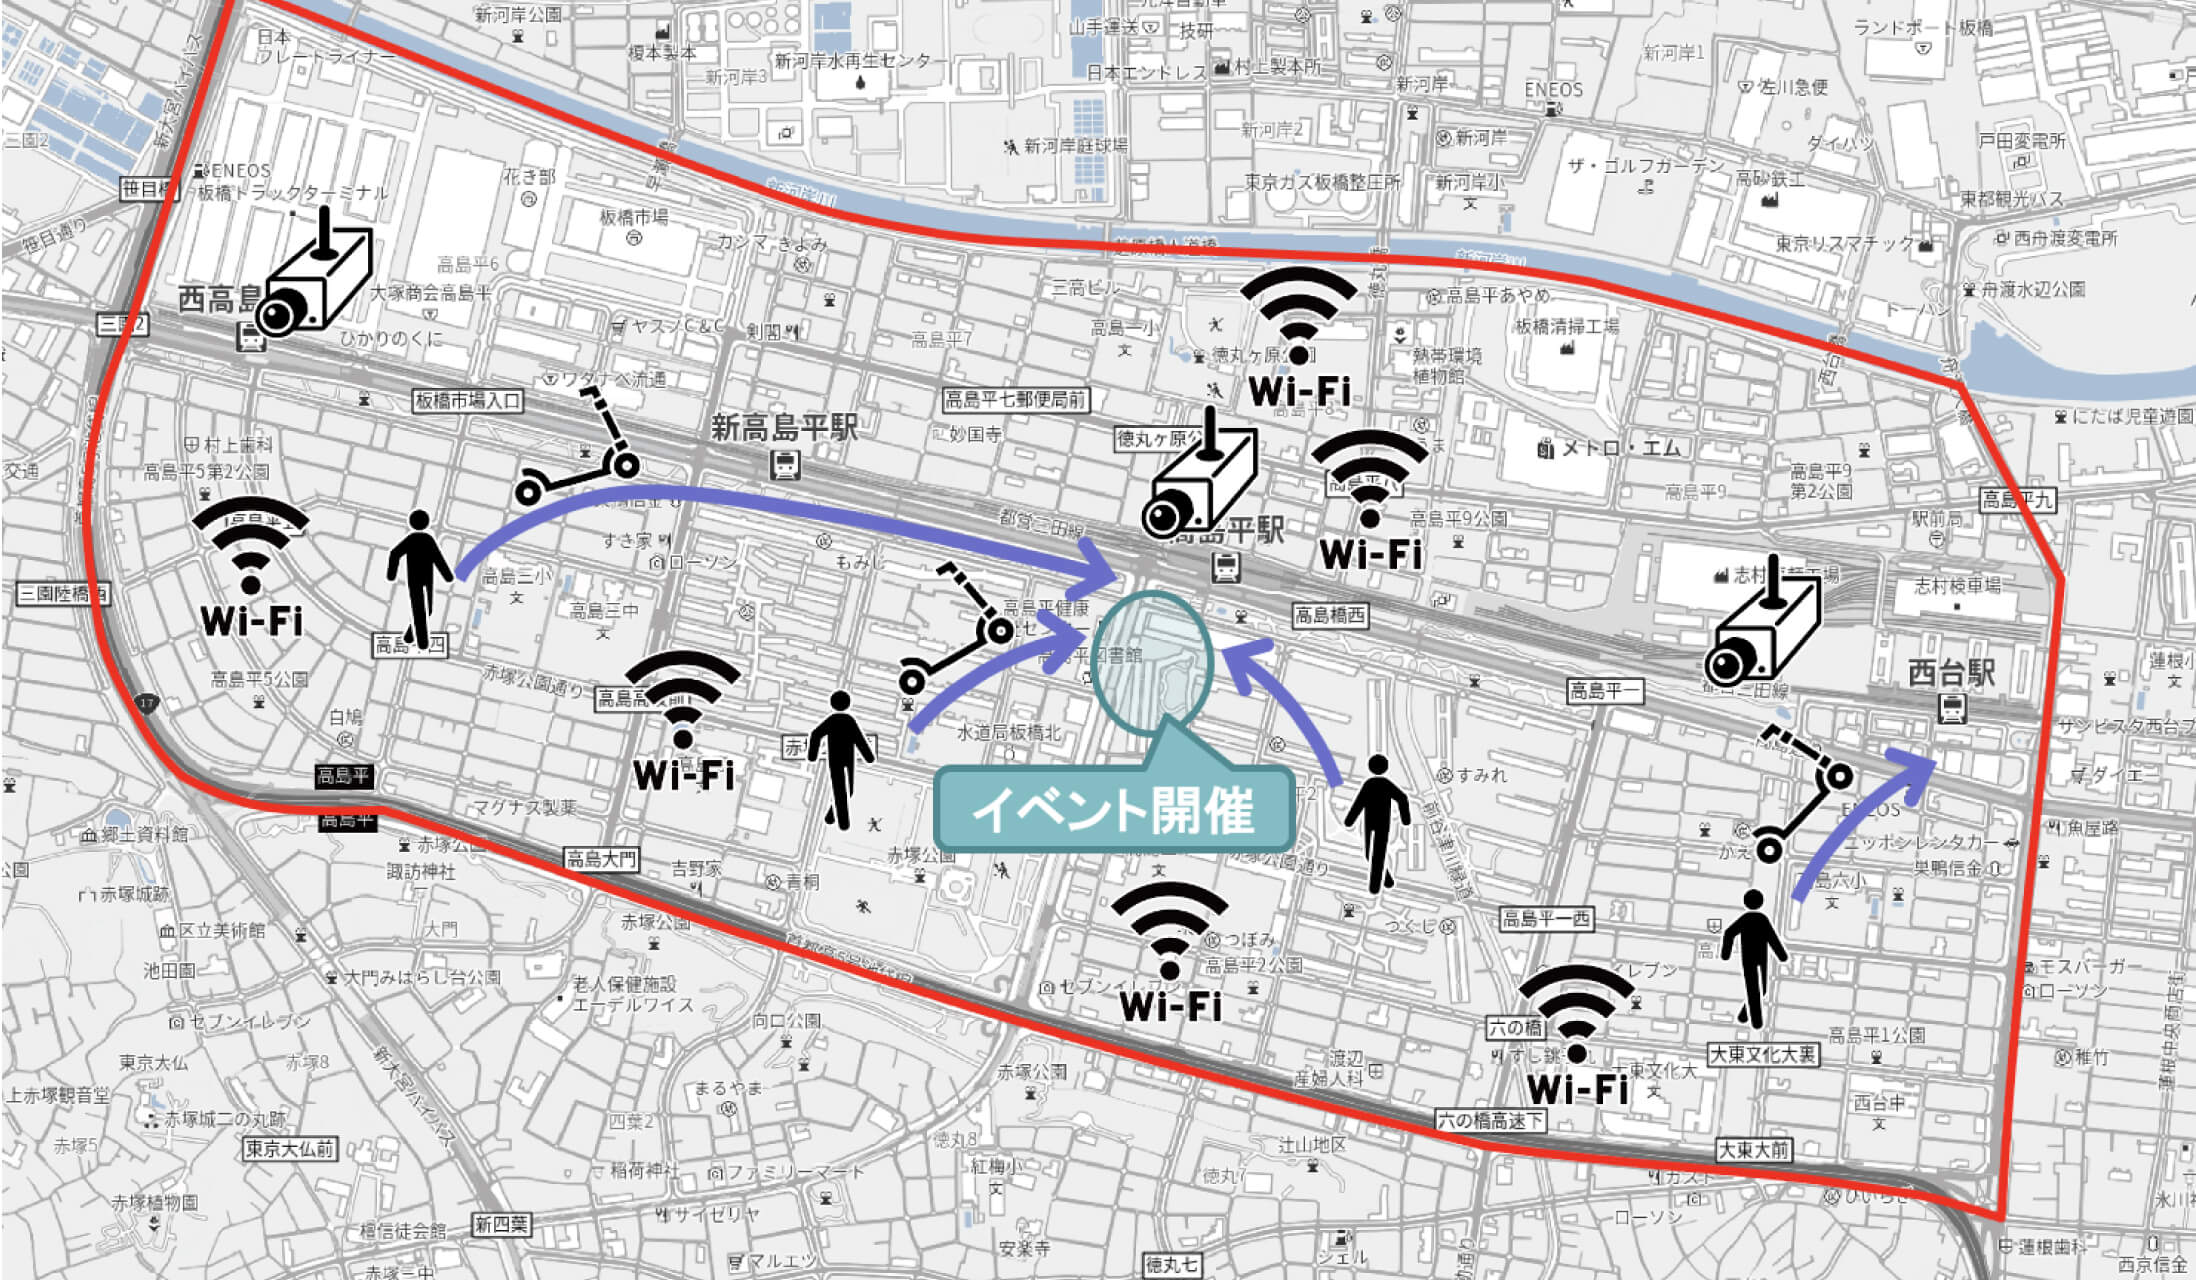 A map showing the locations of sensors installed at various locations in the Takashimadaira area and the flow of people. Arrows show people gathering at the event venue on foot or using electric scooters